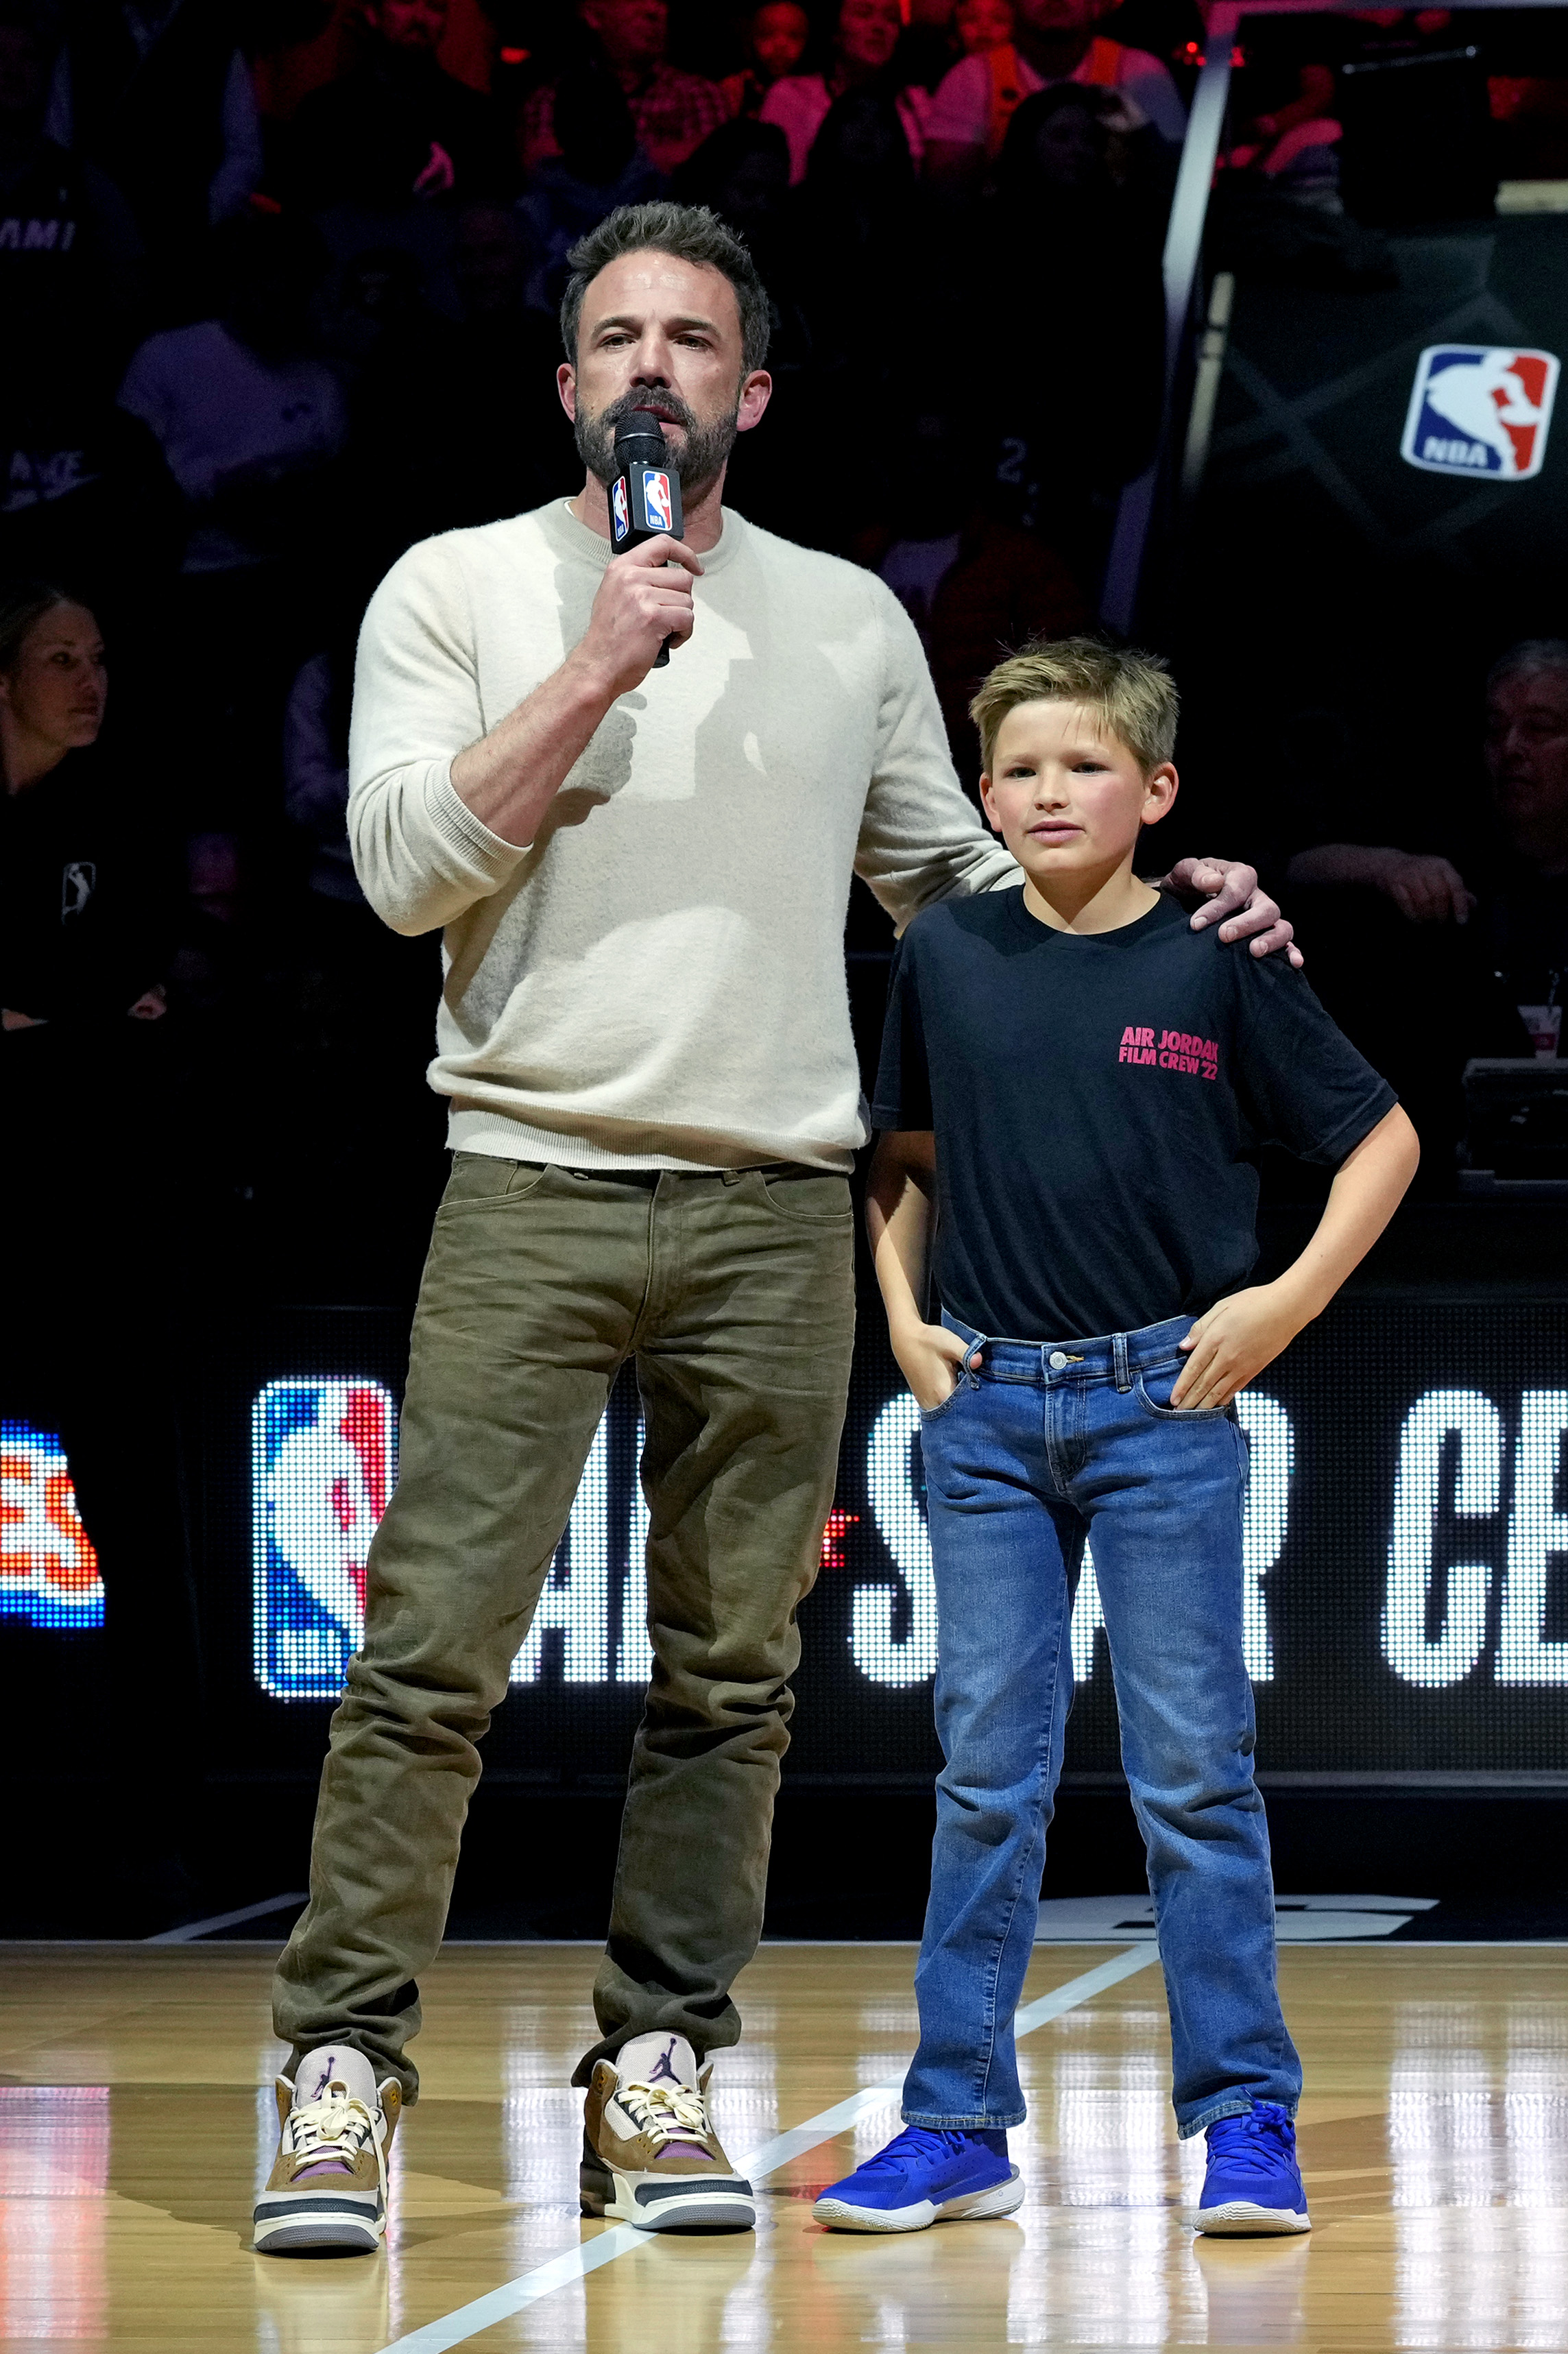 Ben Affleck and Samuel Garner Affleck at the Ruffles Celebrity Game during the 2023 NBA All-Star Weekend on February 17, 2023, in Salt Lake City, Utah. | Source: Getty Images